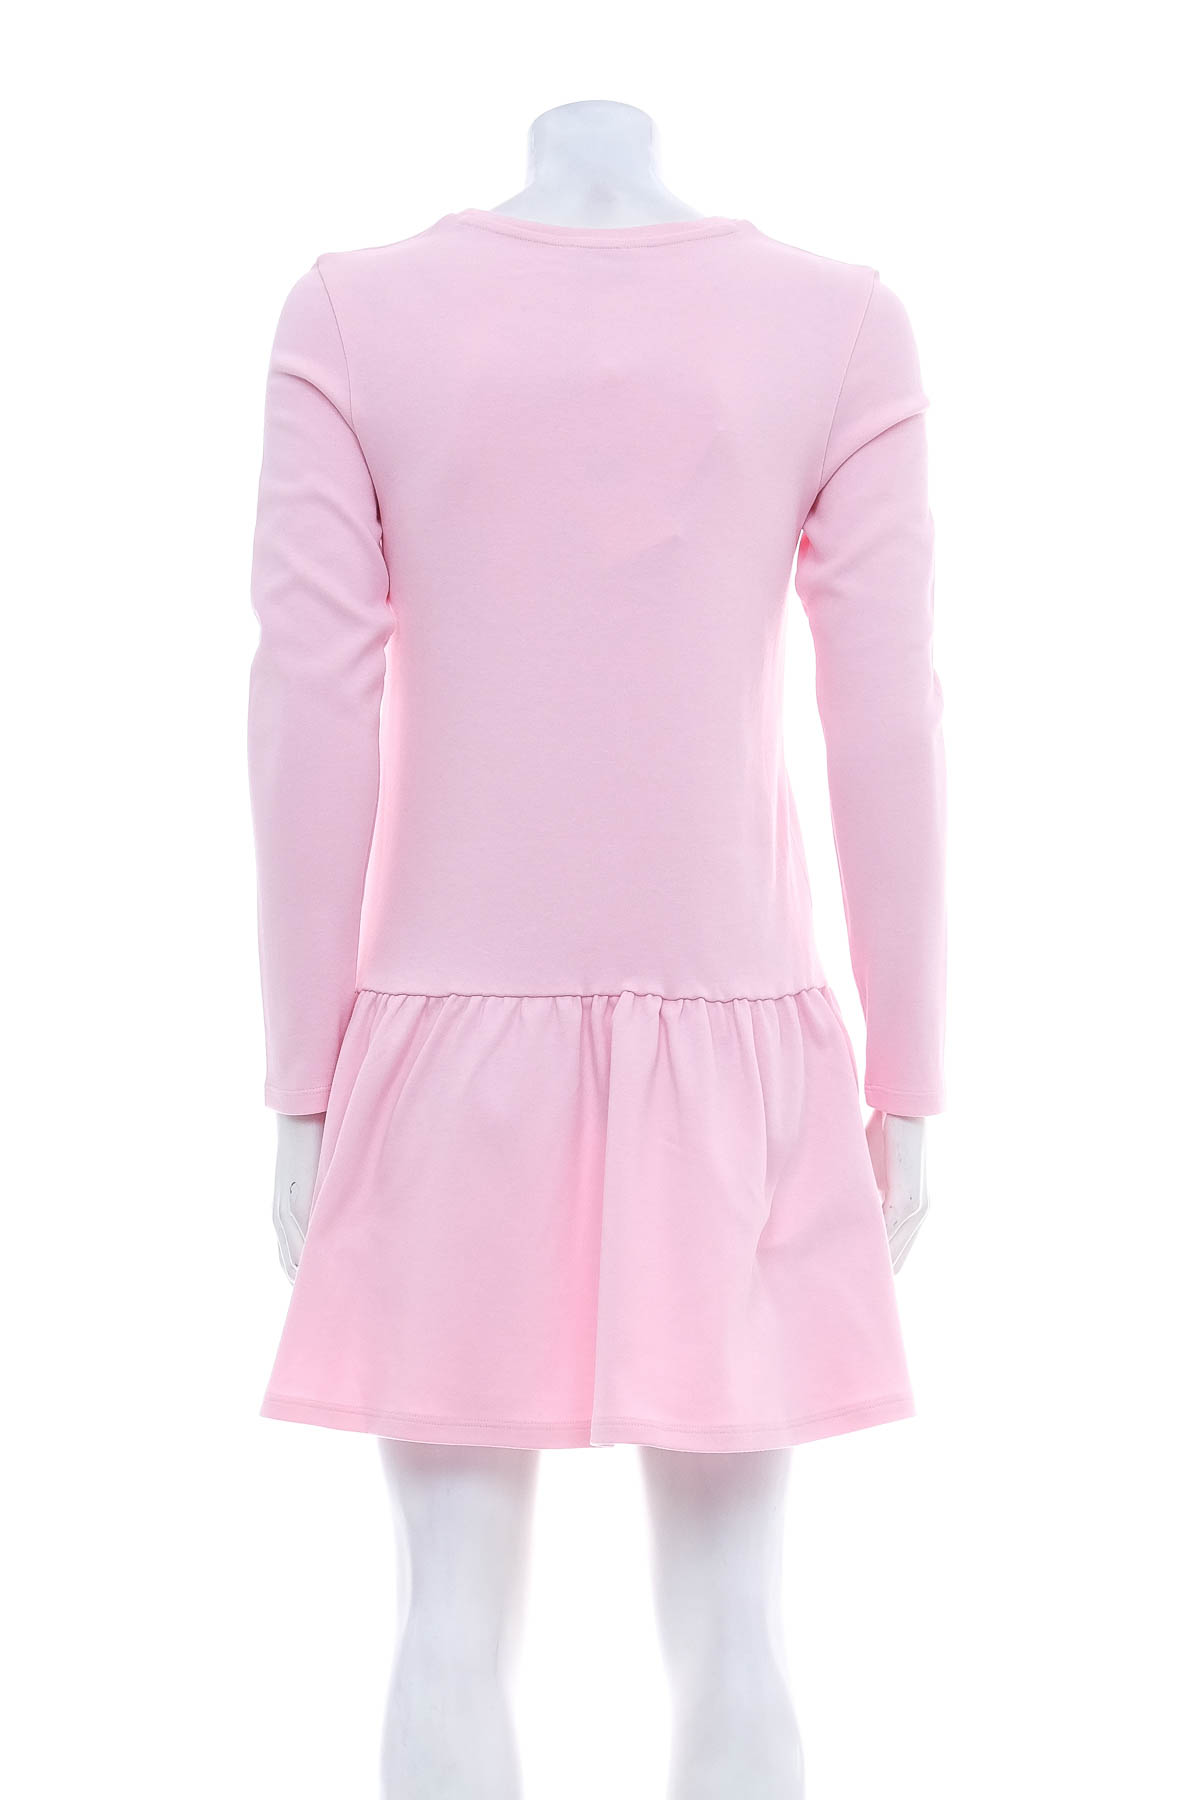 Child's dress - THE MARC JACOBS - 1